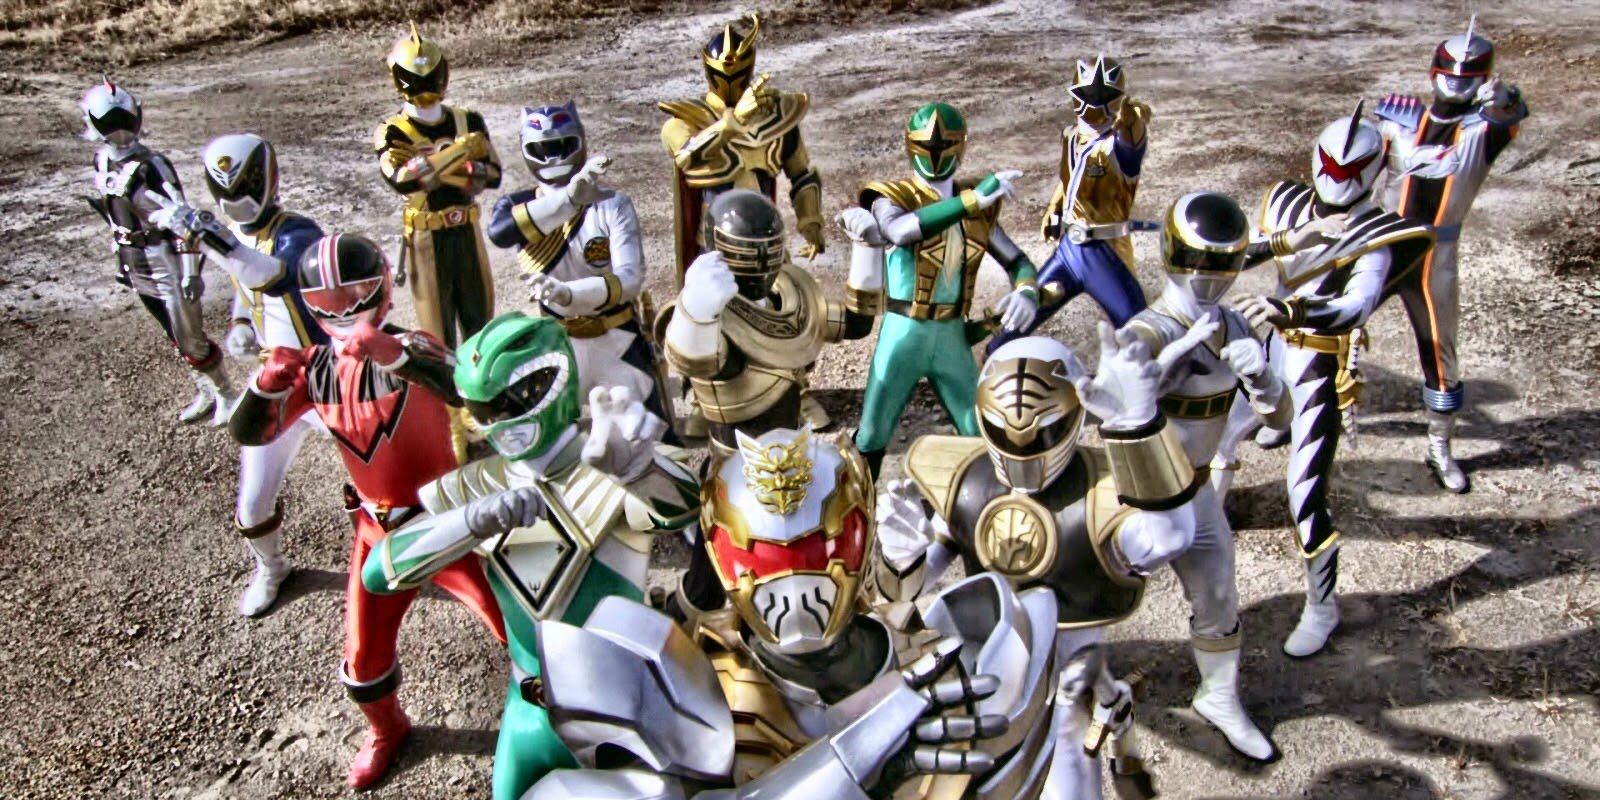 All Sixth Special Power Rangers